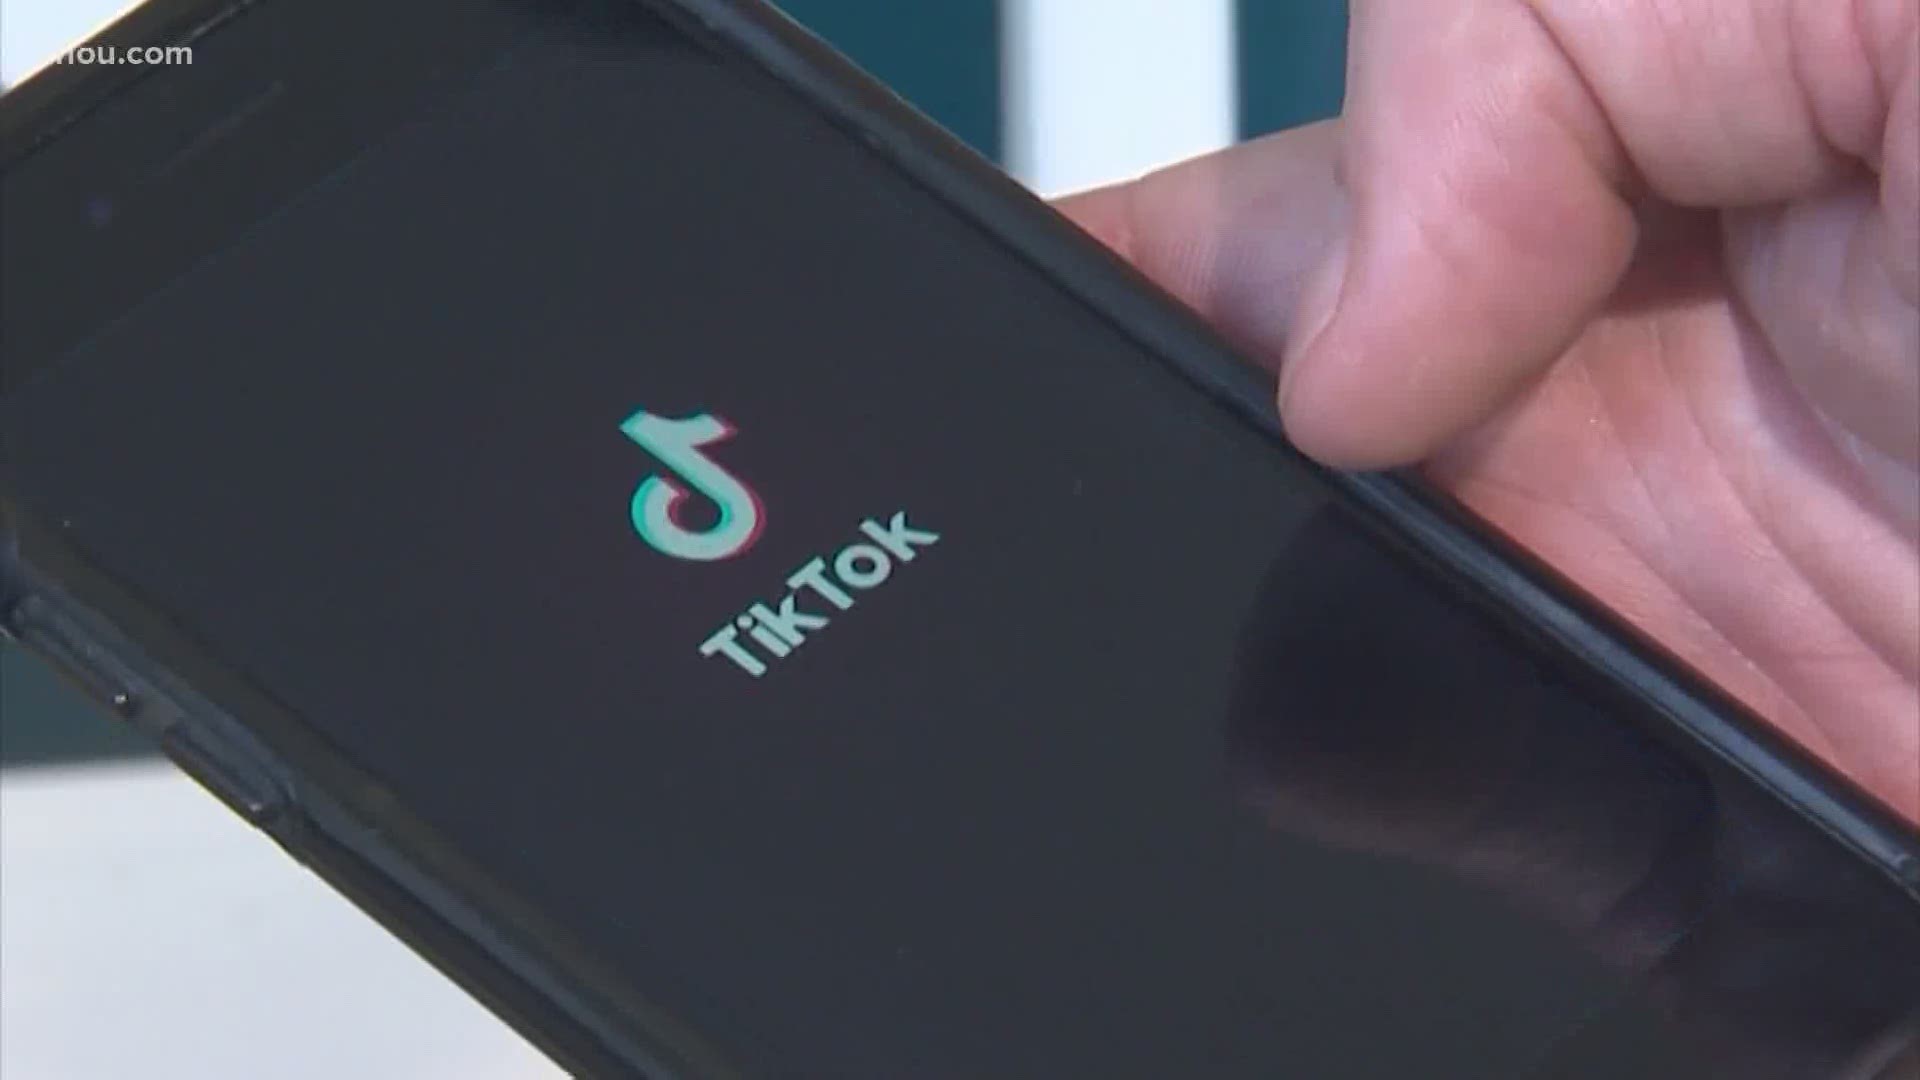 President Trump has issued executive orders that take effect in 45 days against the Chinese owners of TikTok. But it remains unclear if Trump can legally ban the app